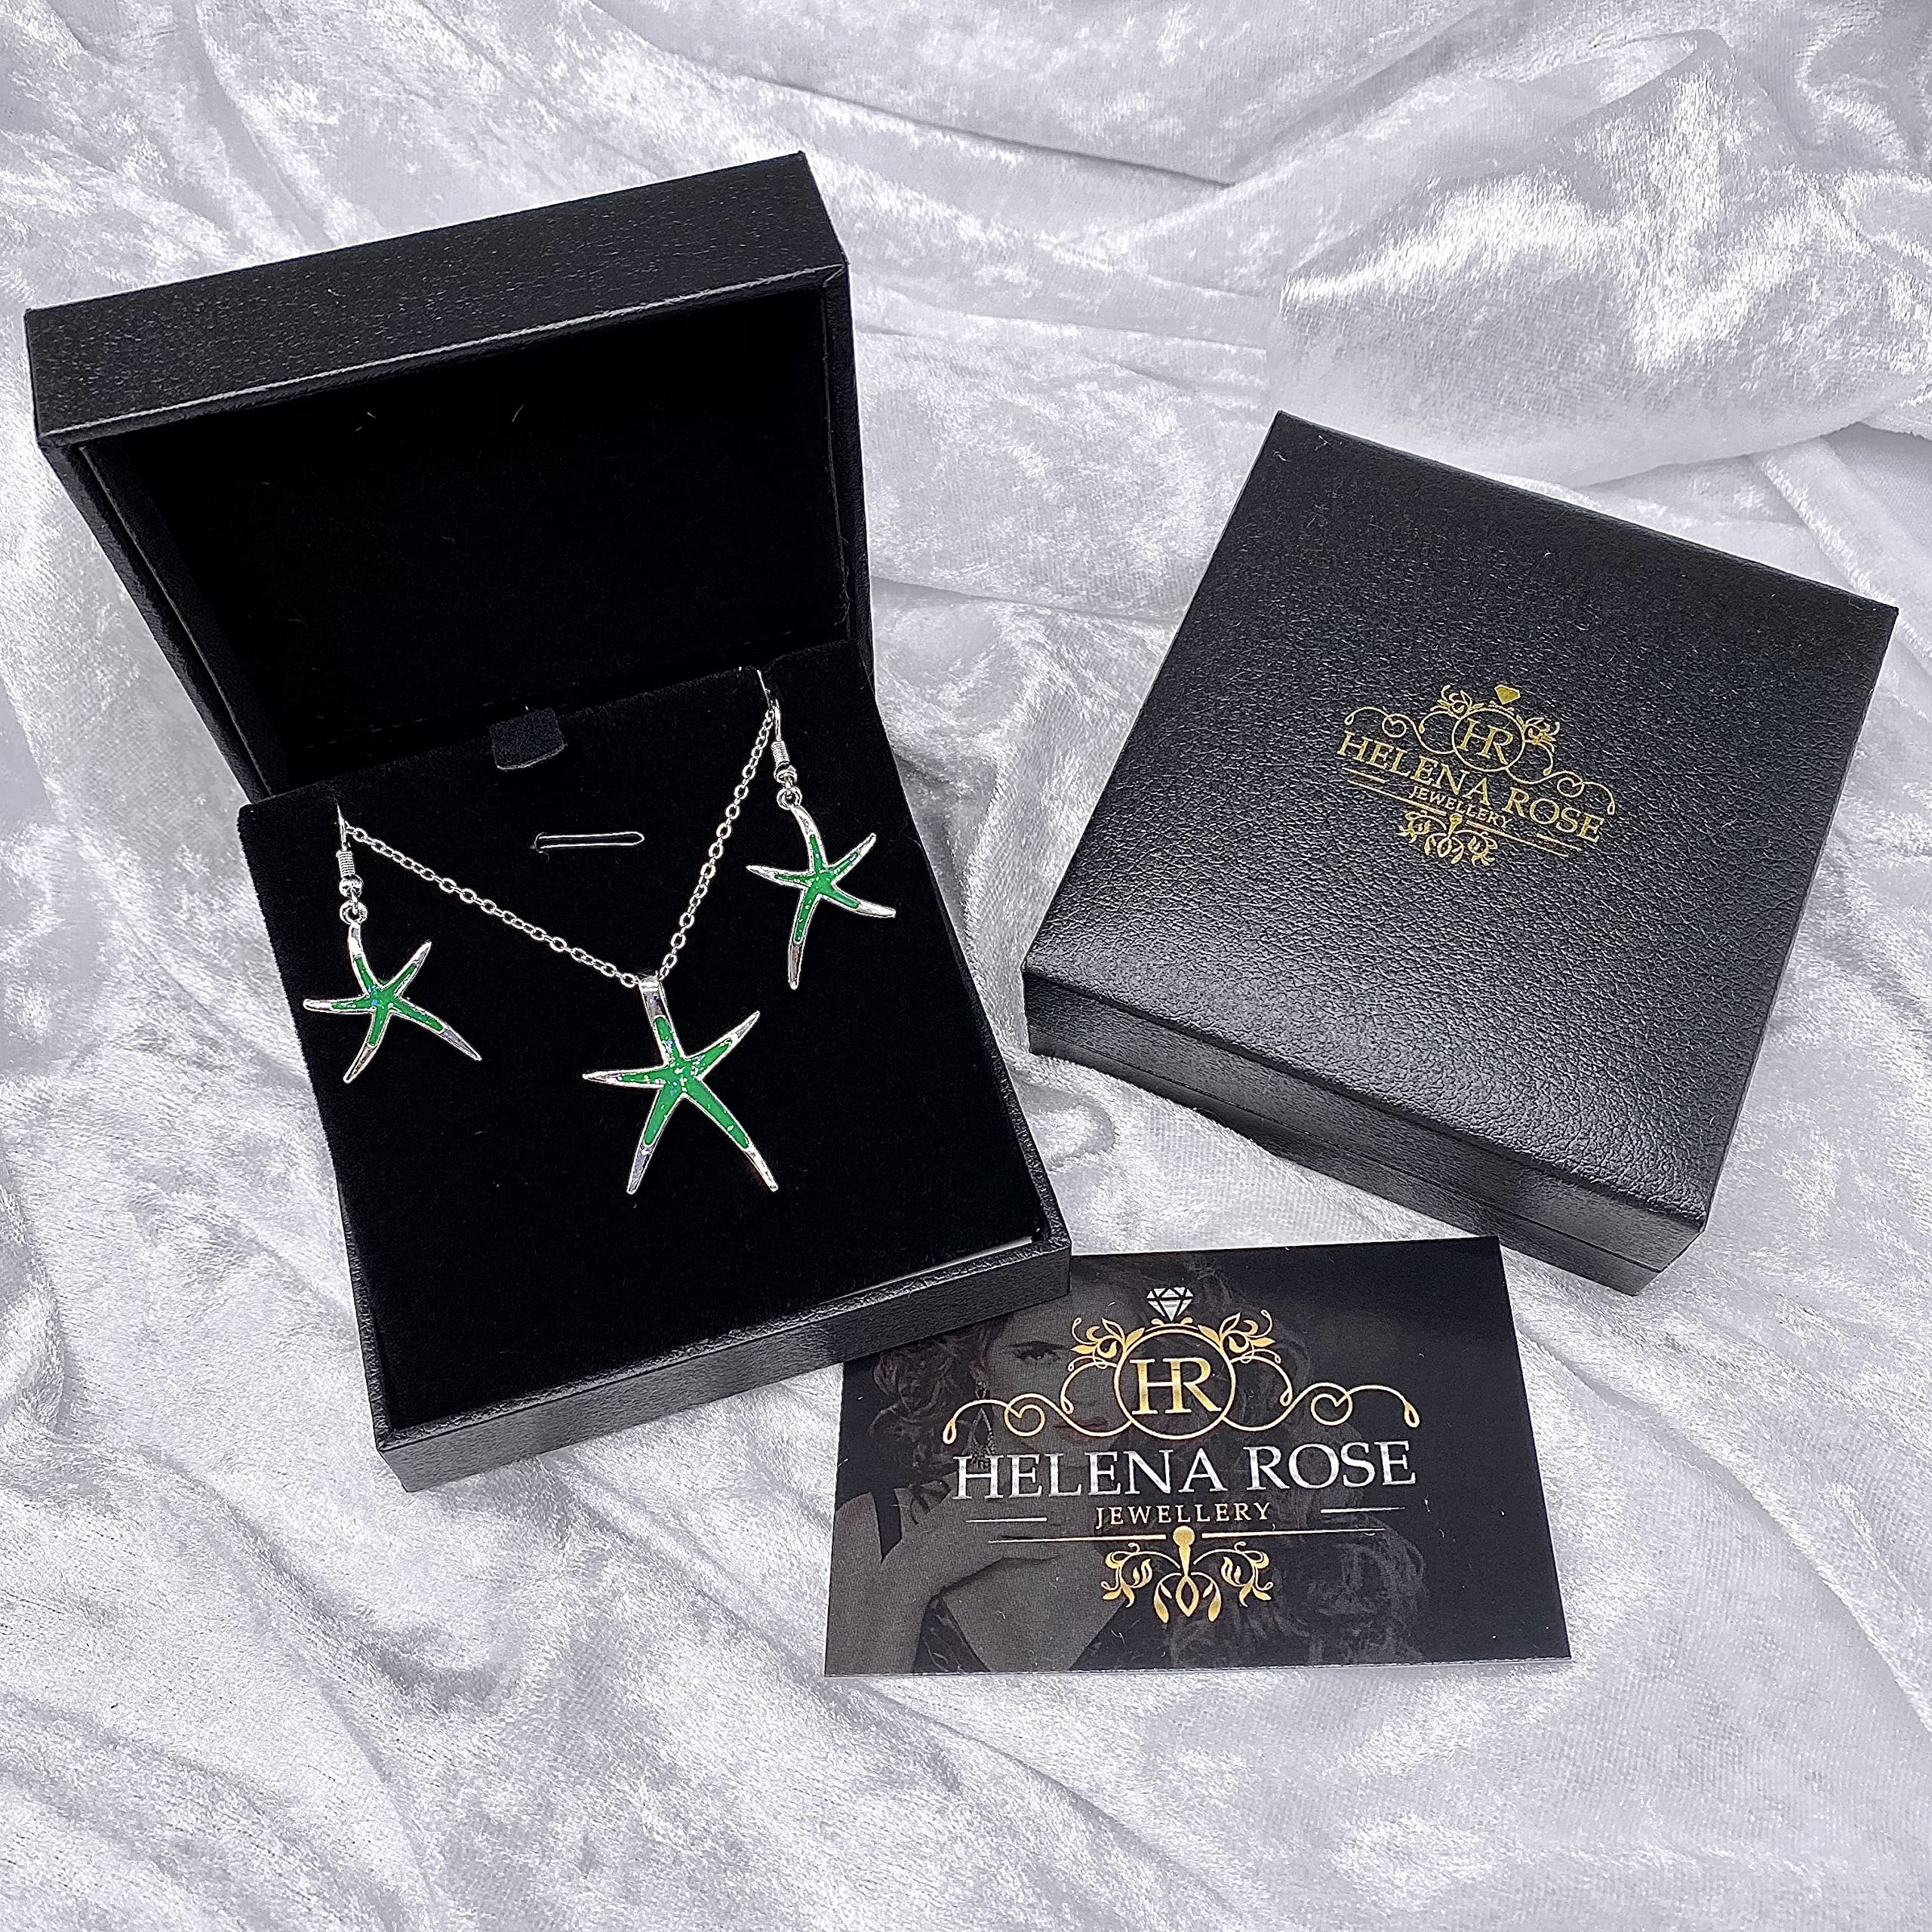 Starfish Jewellery gift set for women. Starfish design pendant necklace with enamel inlay &amp; matching earrings. With Gift Box-